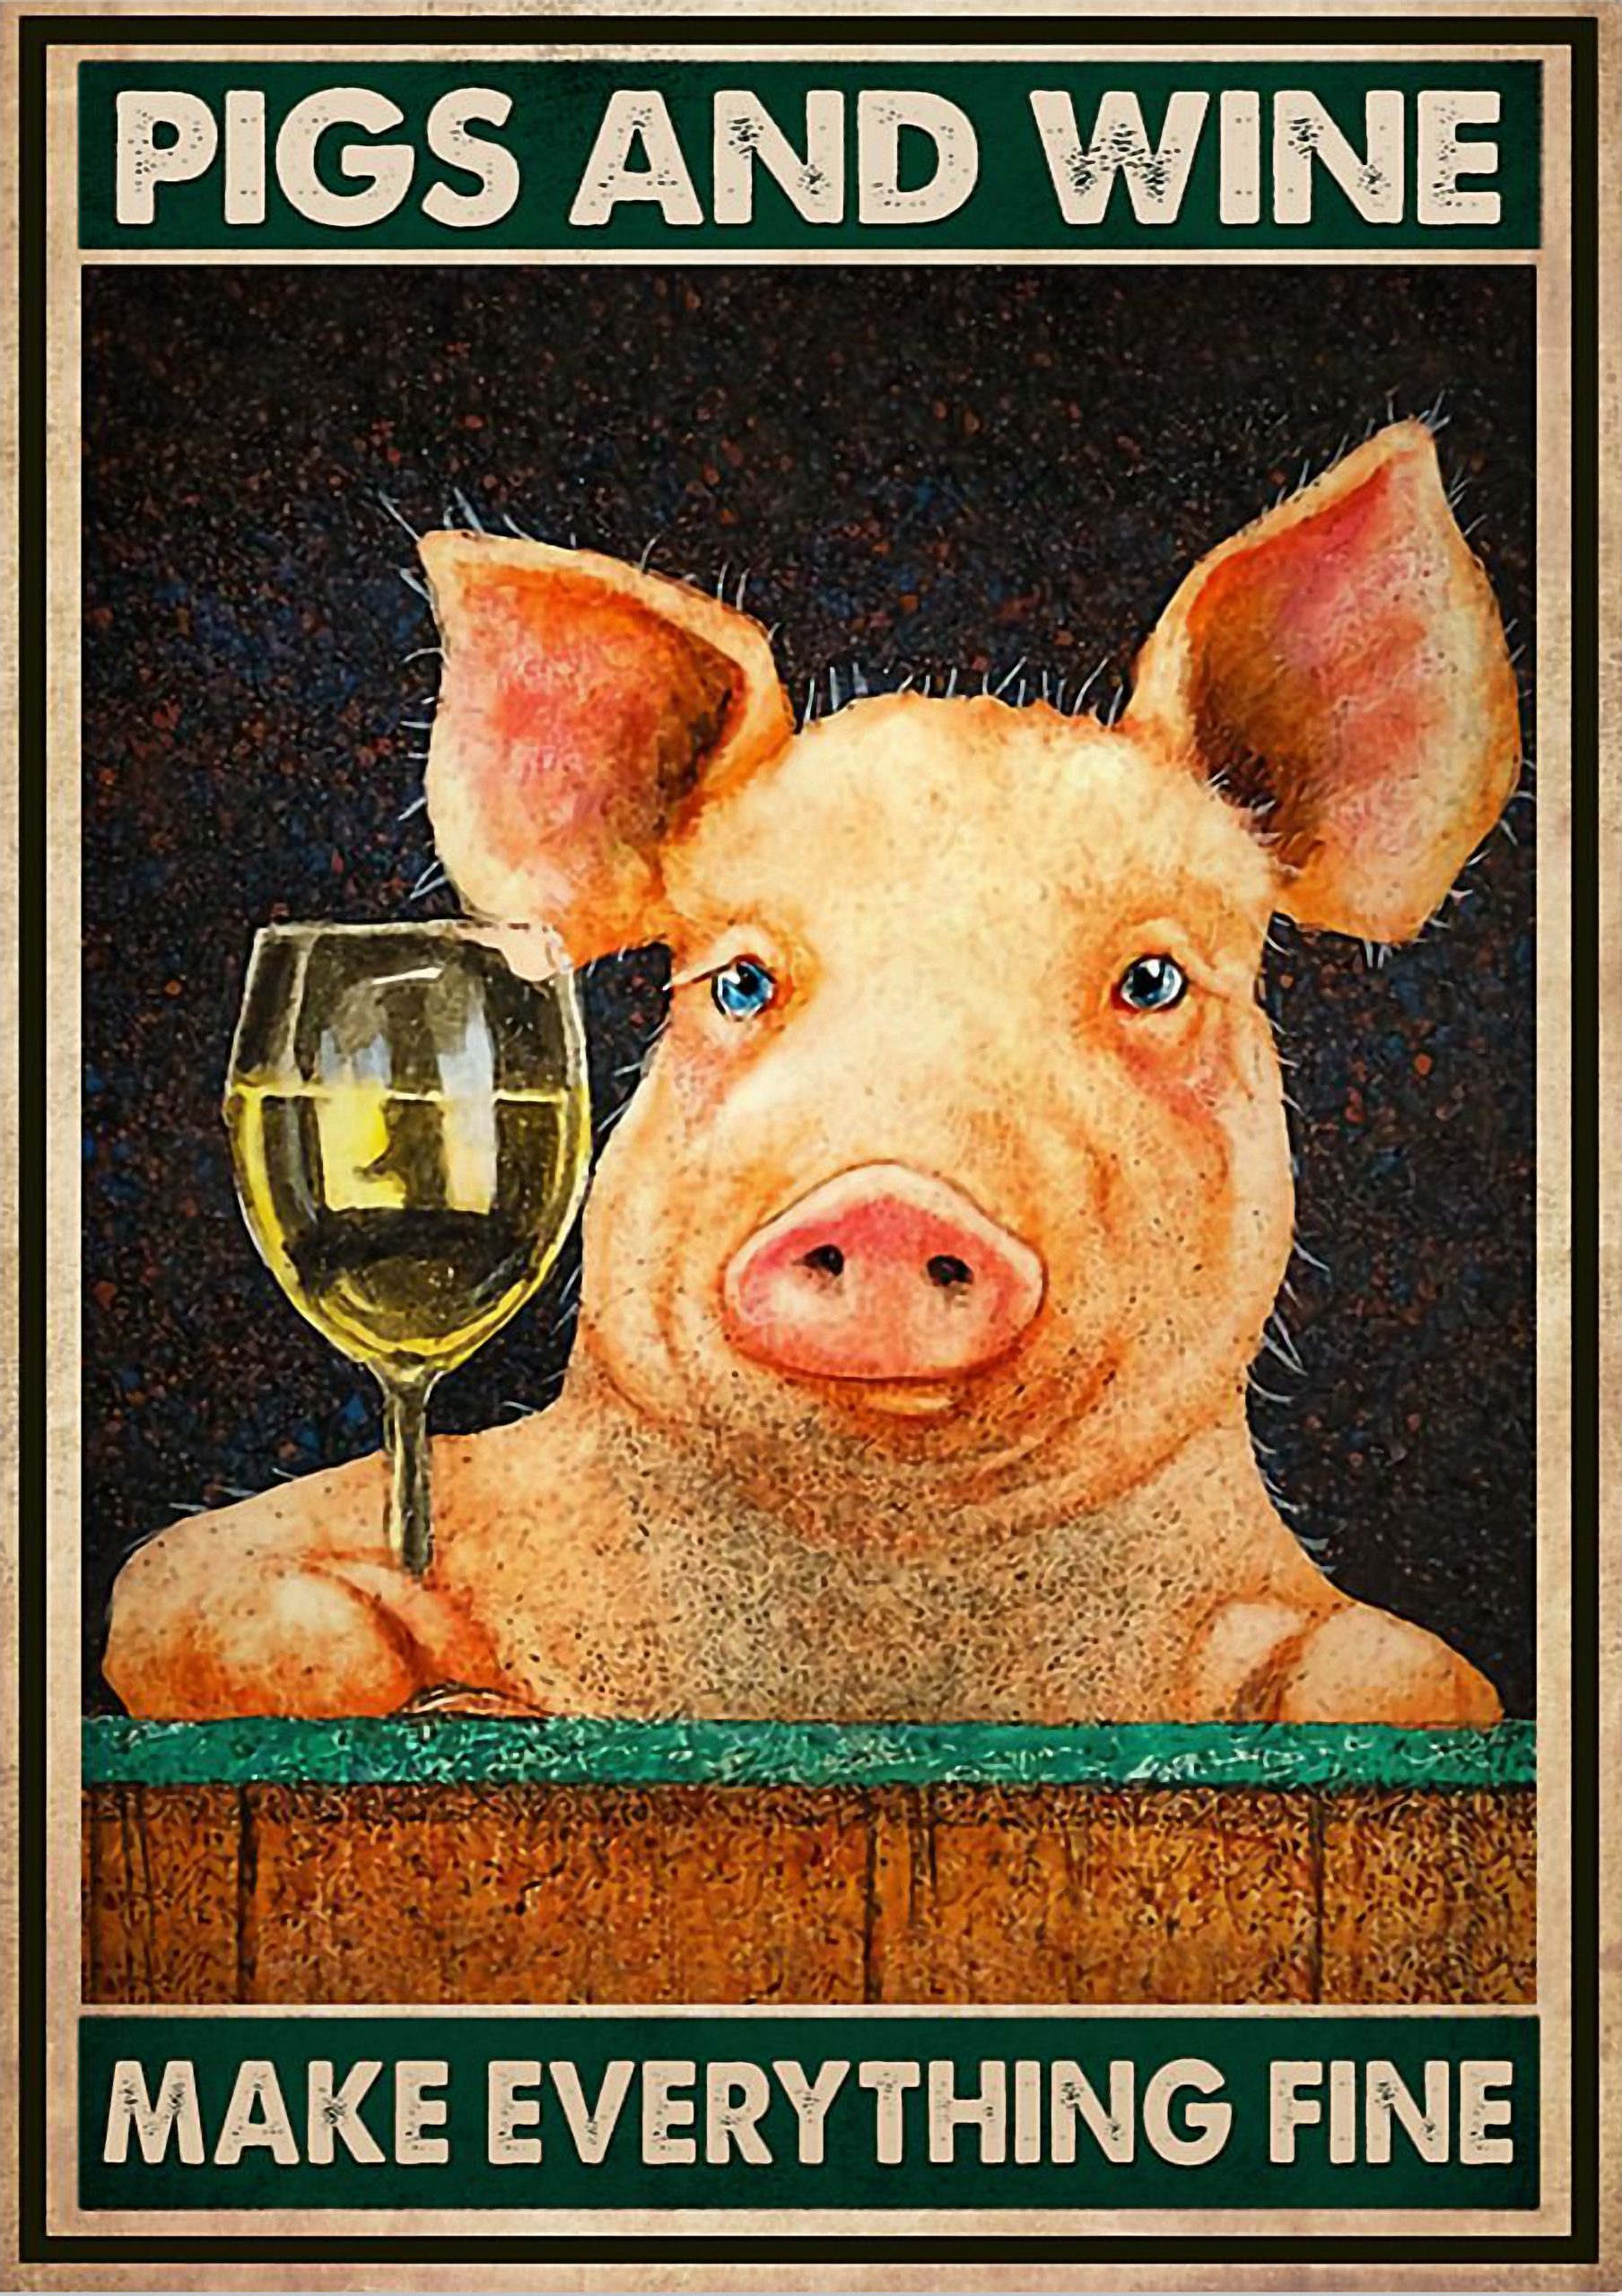 Pigs and wine make everything fine poster